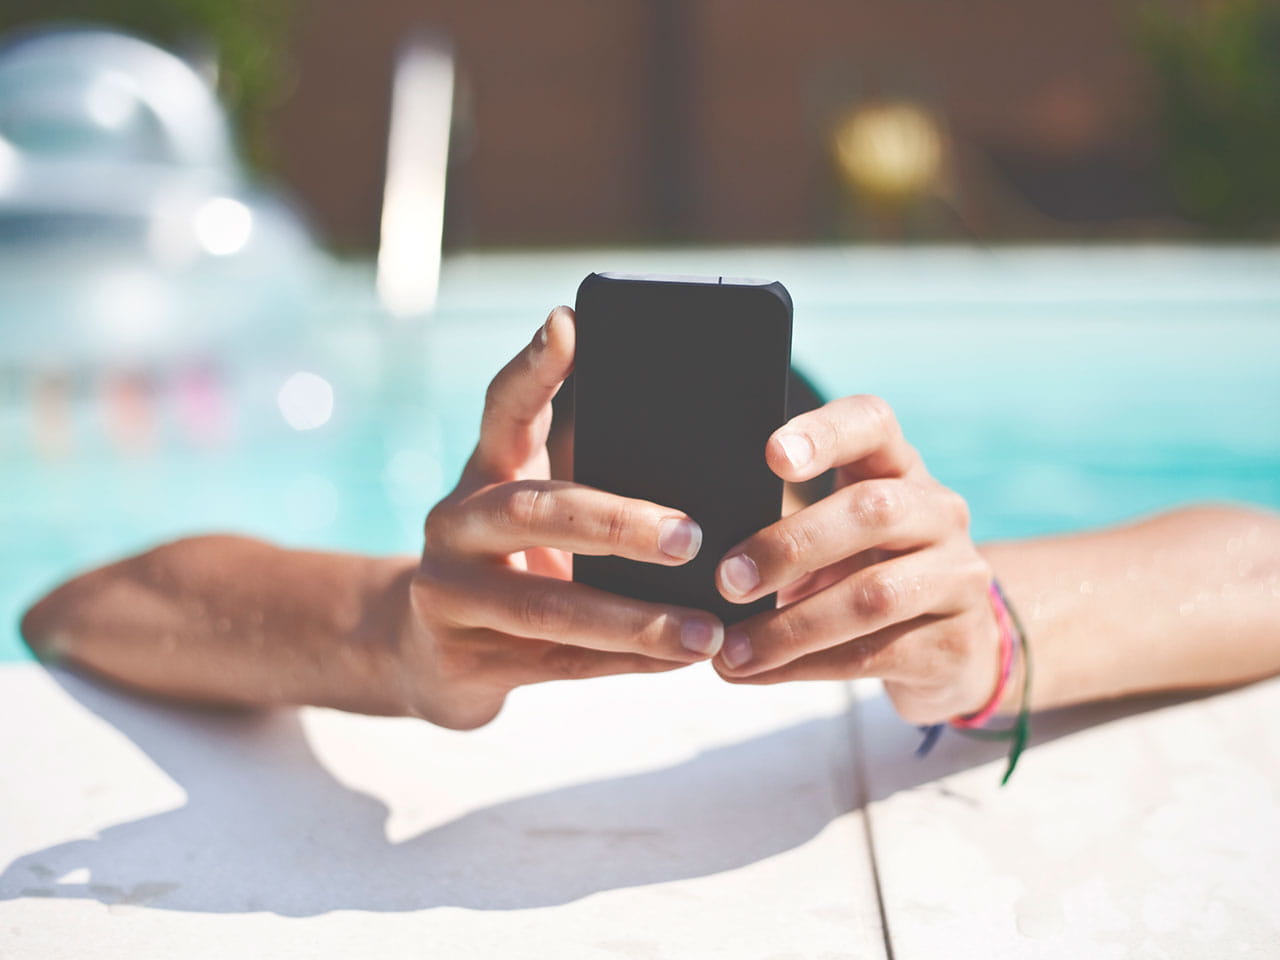 Using smartphone by the pool